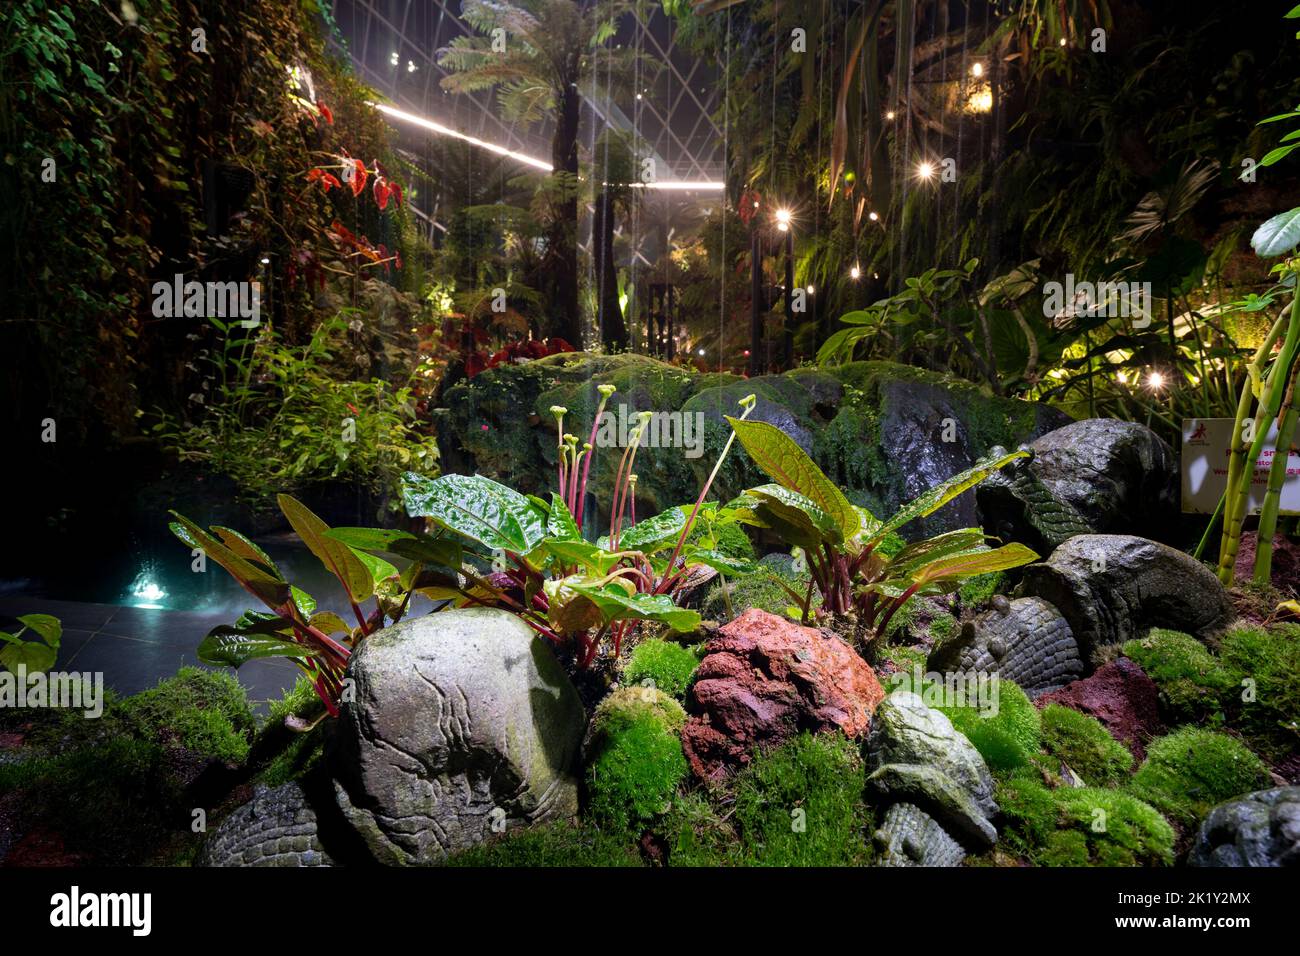 Night view of the waterfall on Cloud Mountain in the Cloud Forest, one of the two vast conservatories in the Gardens by the Bay, Marina Bay Singapore Stock Photo